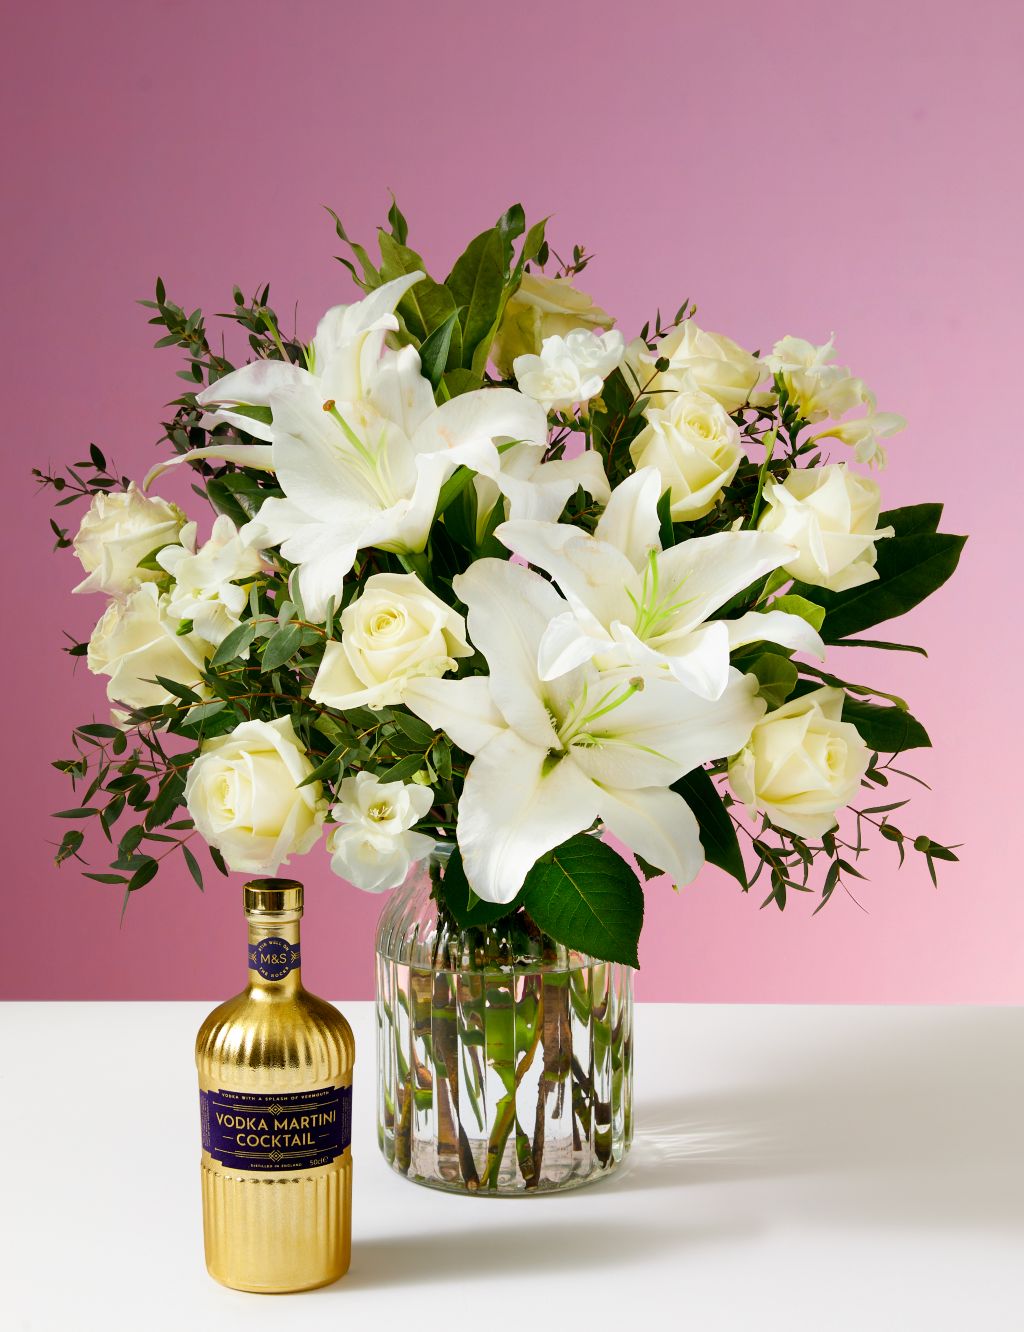 The Dame Joan Collins Rose & Lily Bouquet with Vodka Martini Cocktail